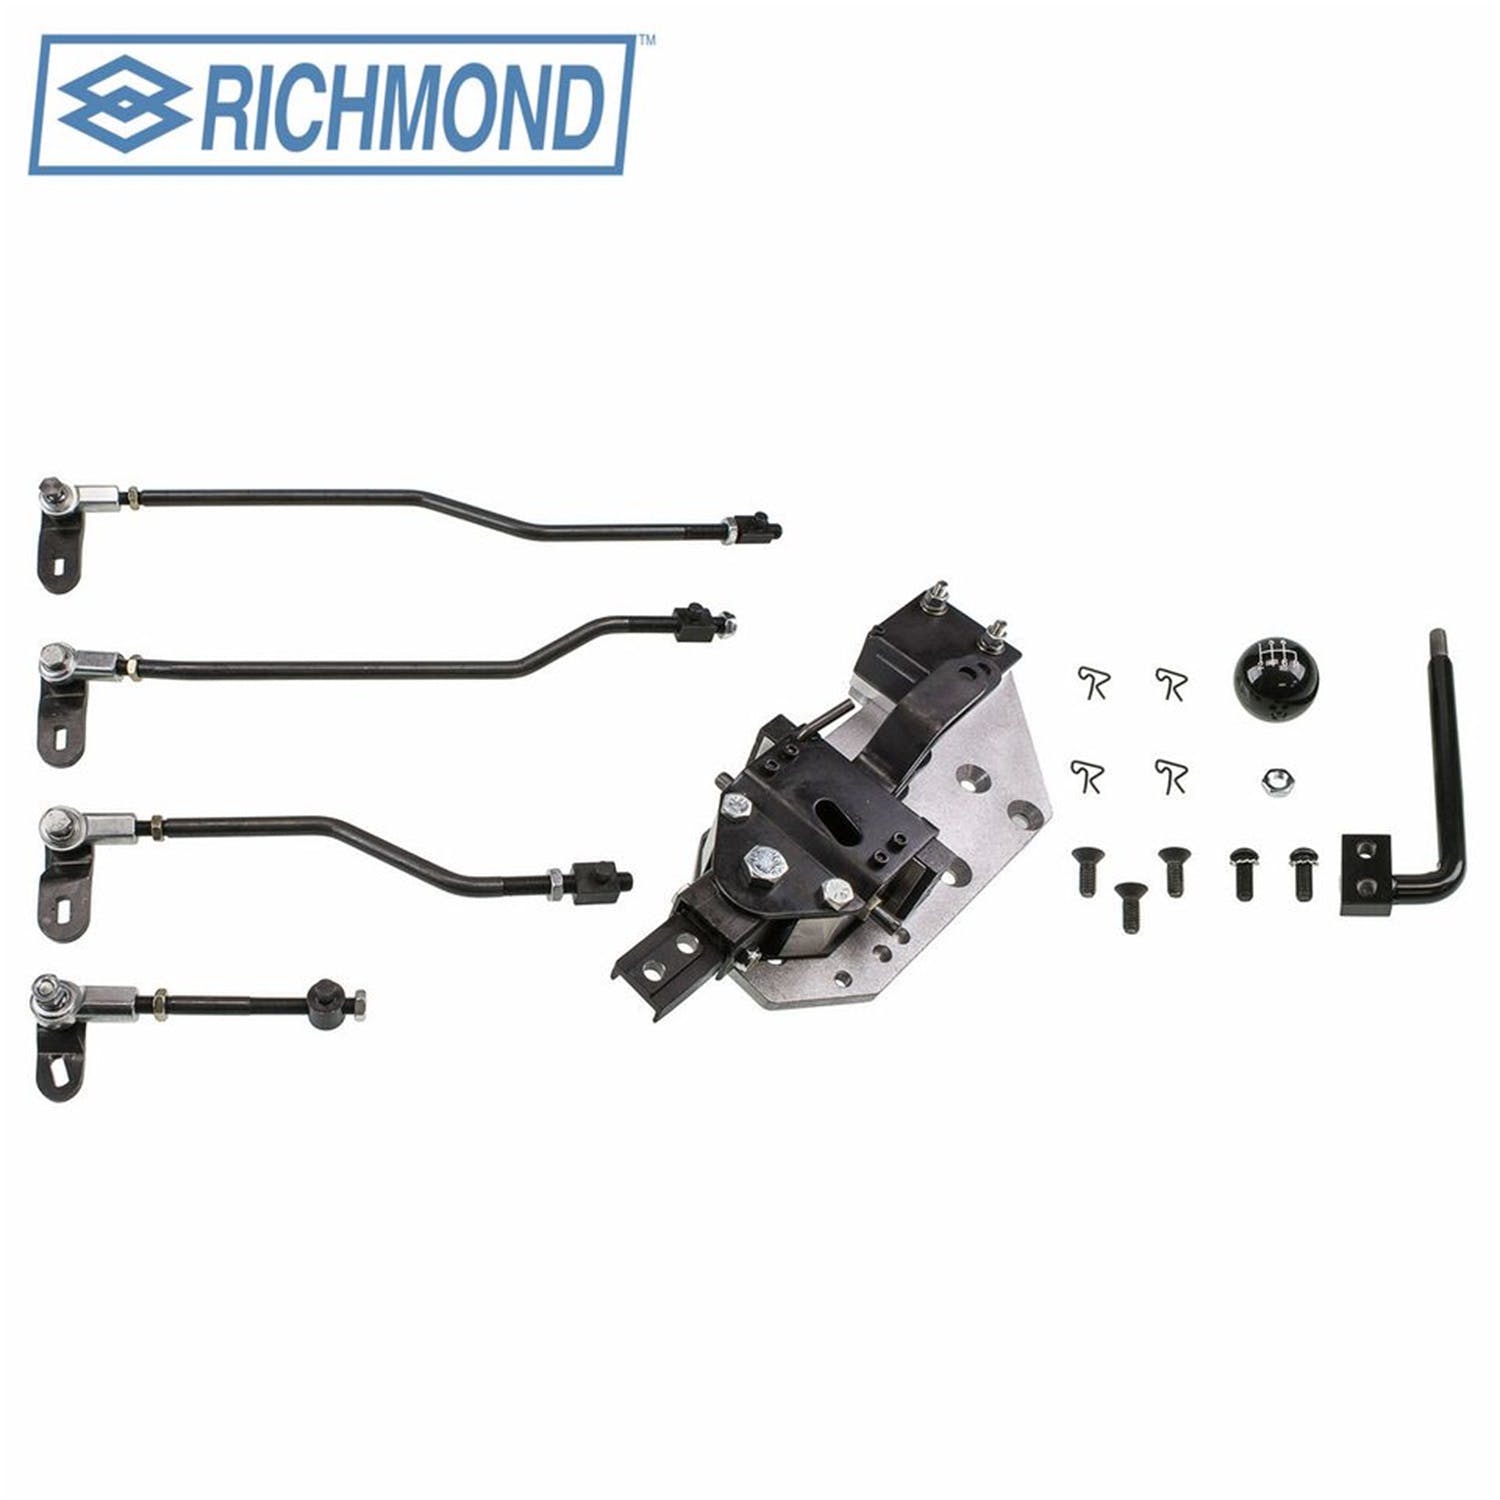 Richmond HR6002 Shifter (GM T5 REPLACEMENT) (R